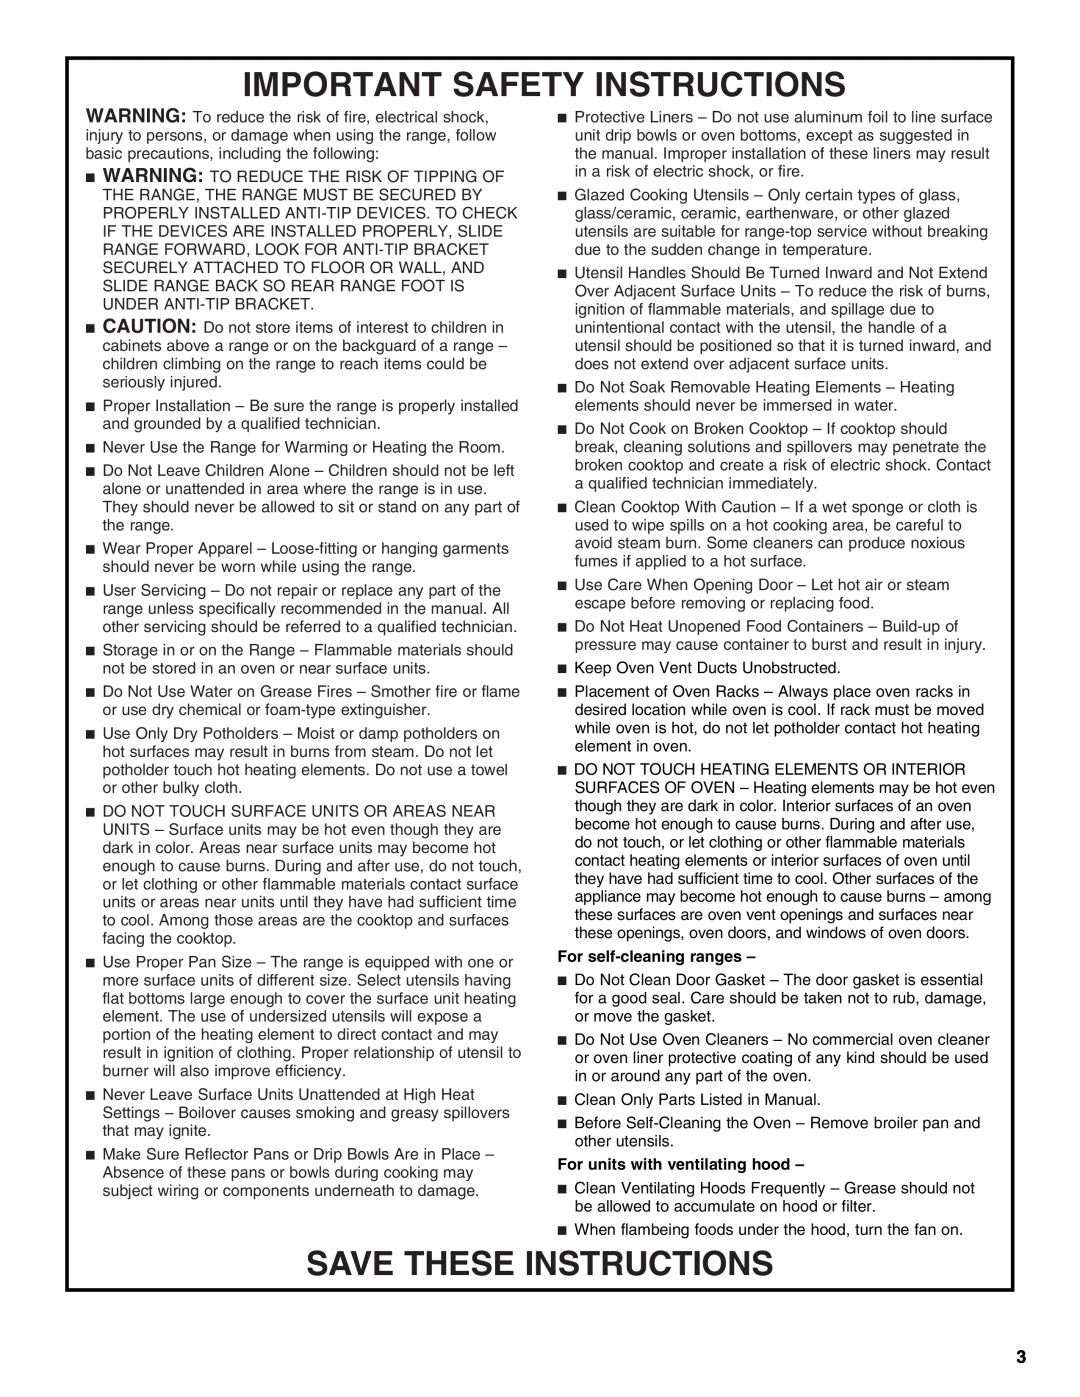 Whirlpool W10394385A warranty Important Safety Instructions, Save These Instructions, For self-cleaning ranges 